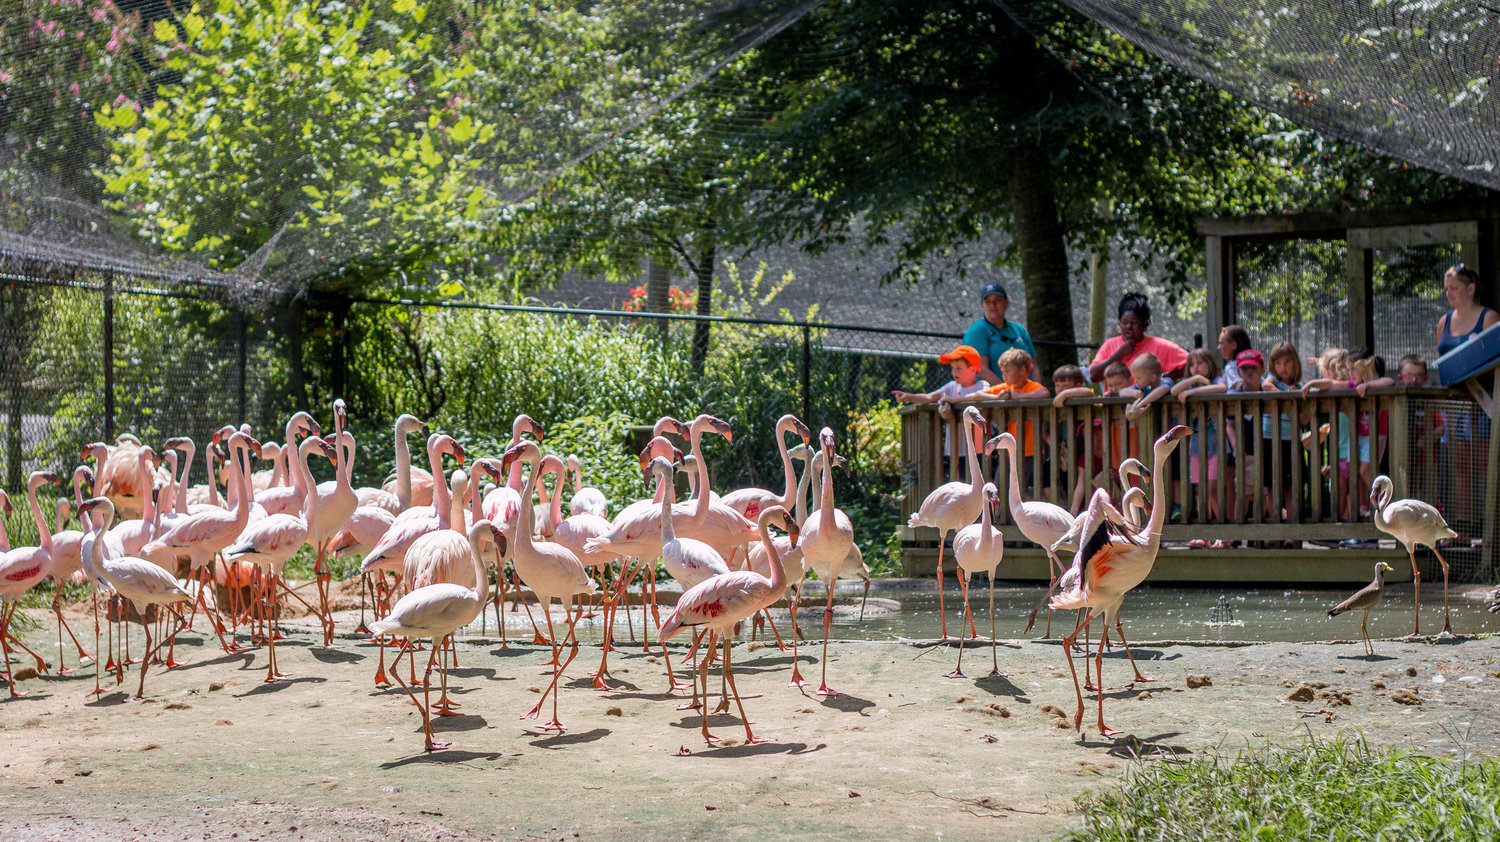 Eight walk-through aviaries allow visitors to interact with birds, including macaws, American flamingos and parakeets.